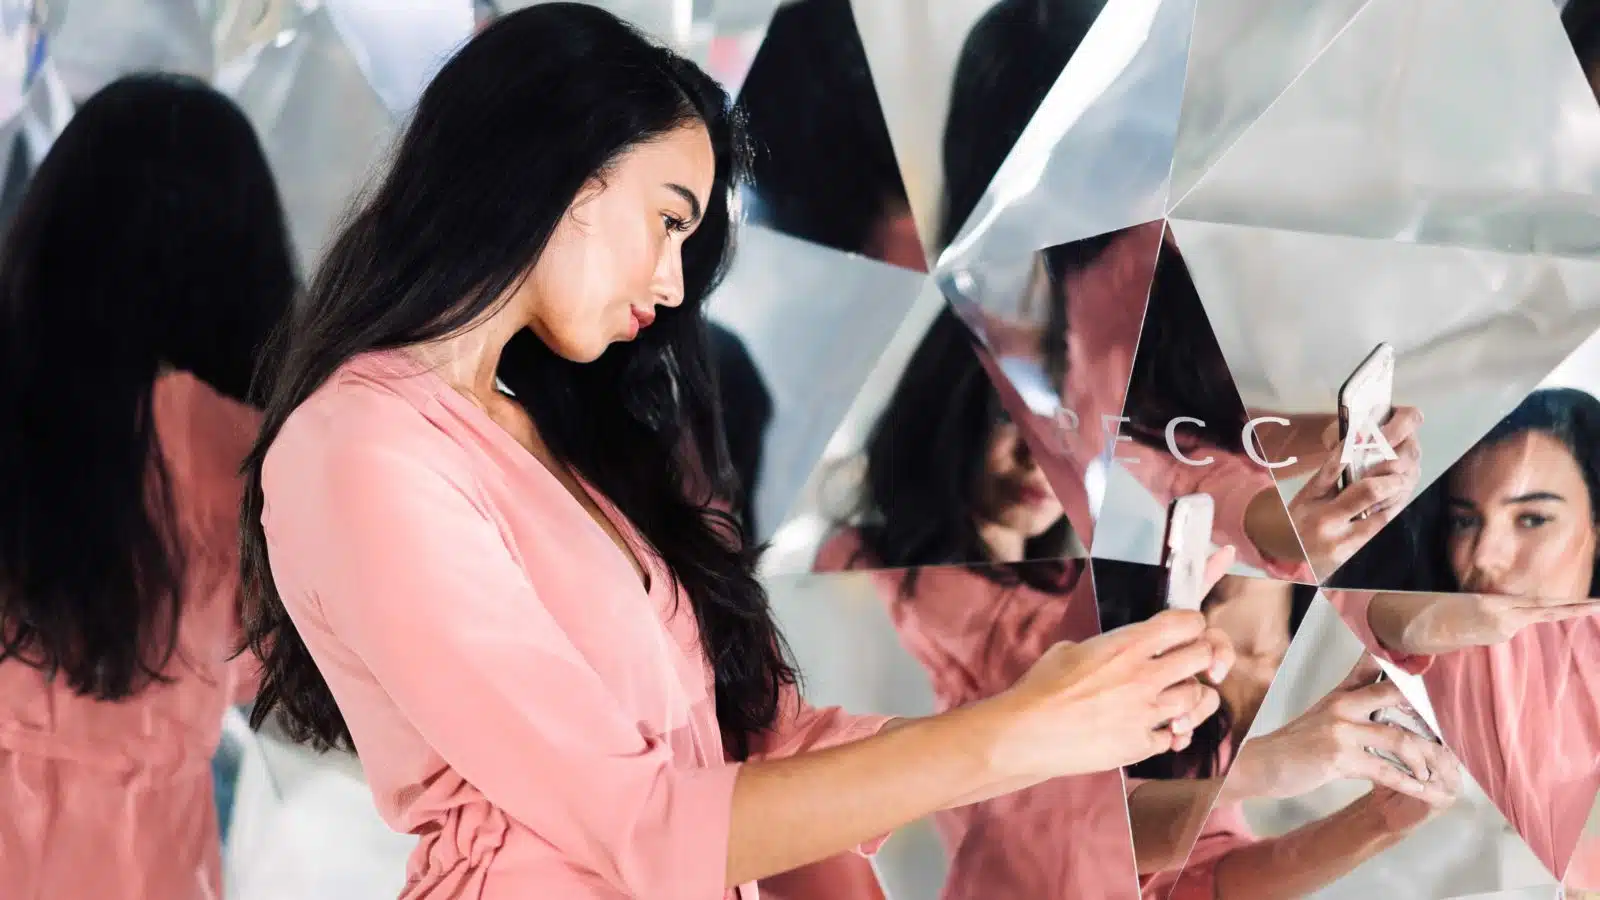 Conversion marketing agency Drew+Rose created an immersive London pop-up event to launch Australian brand BECCA in the UK